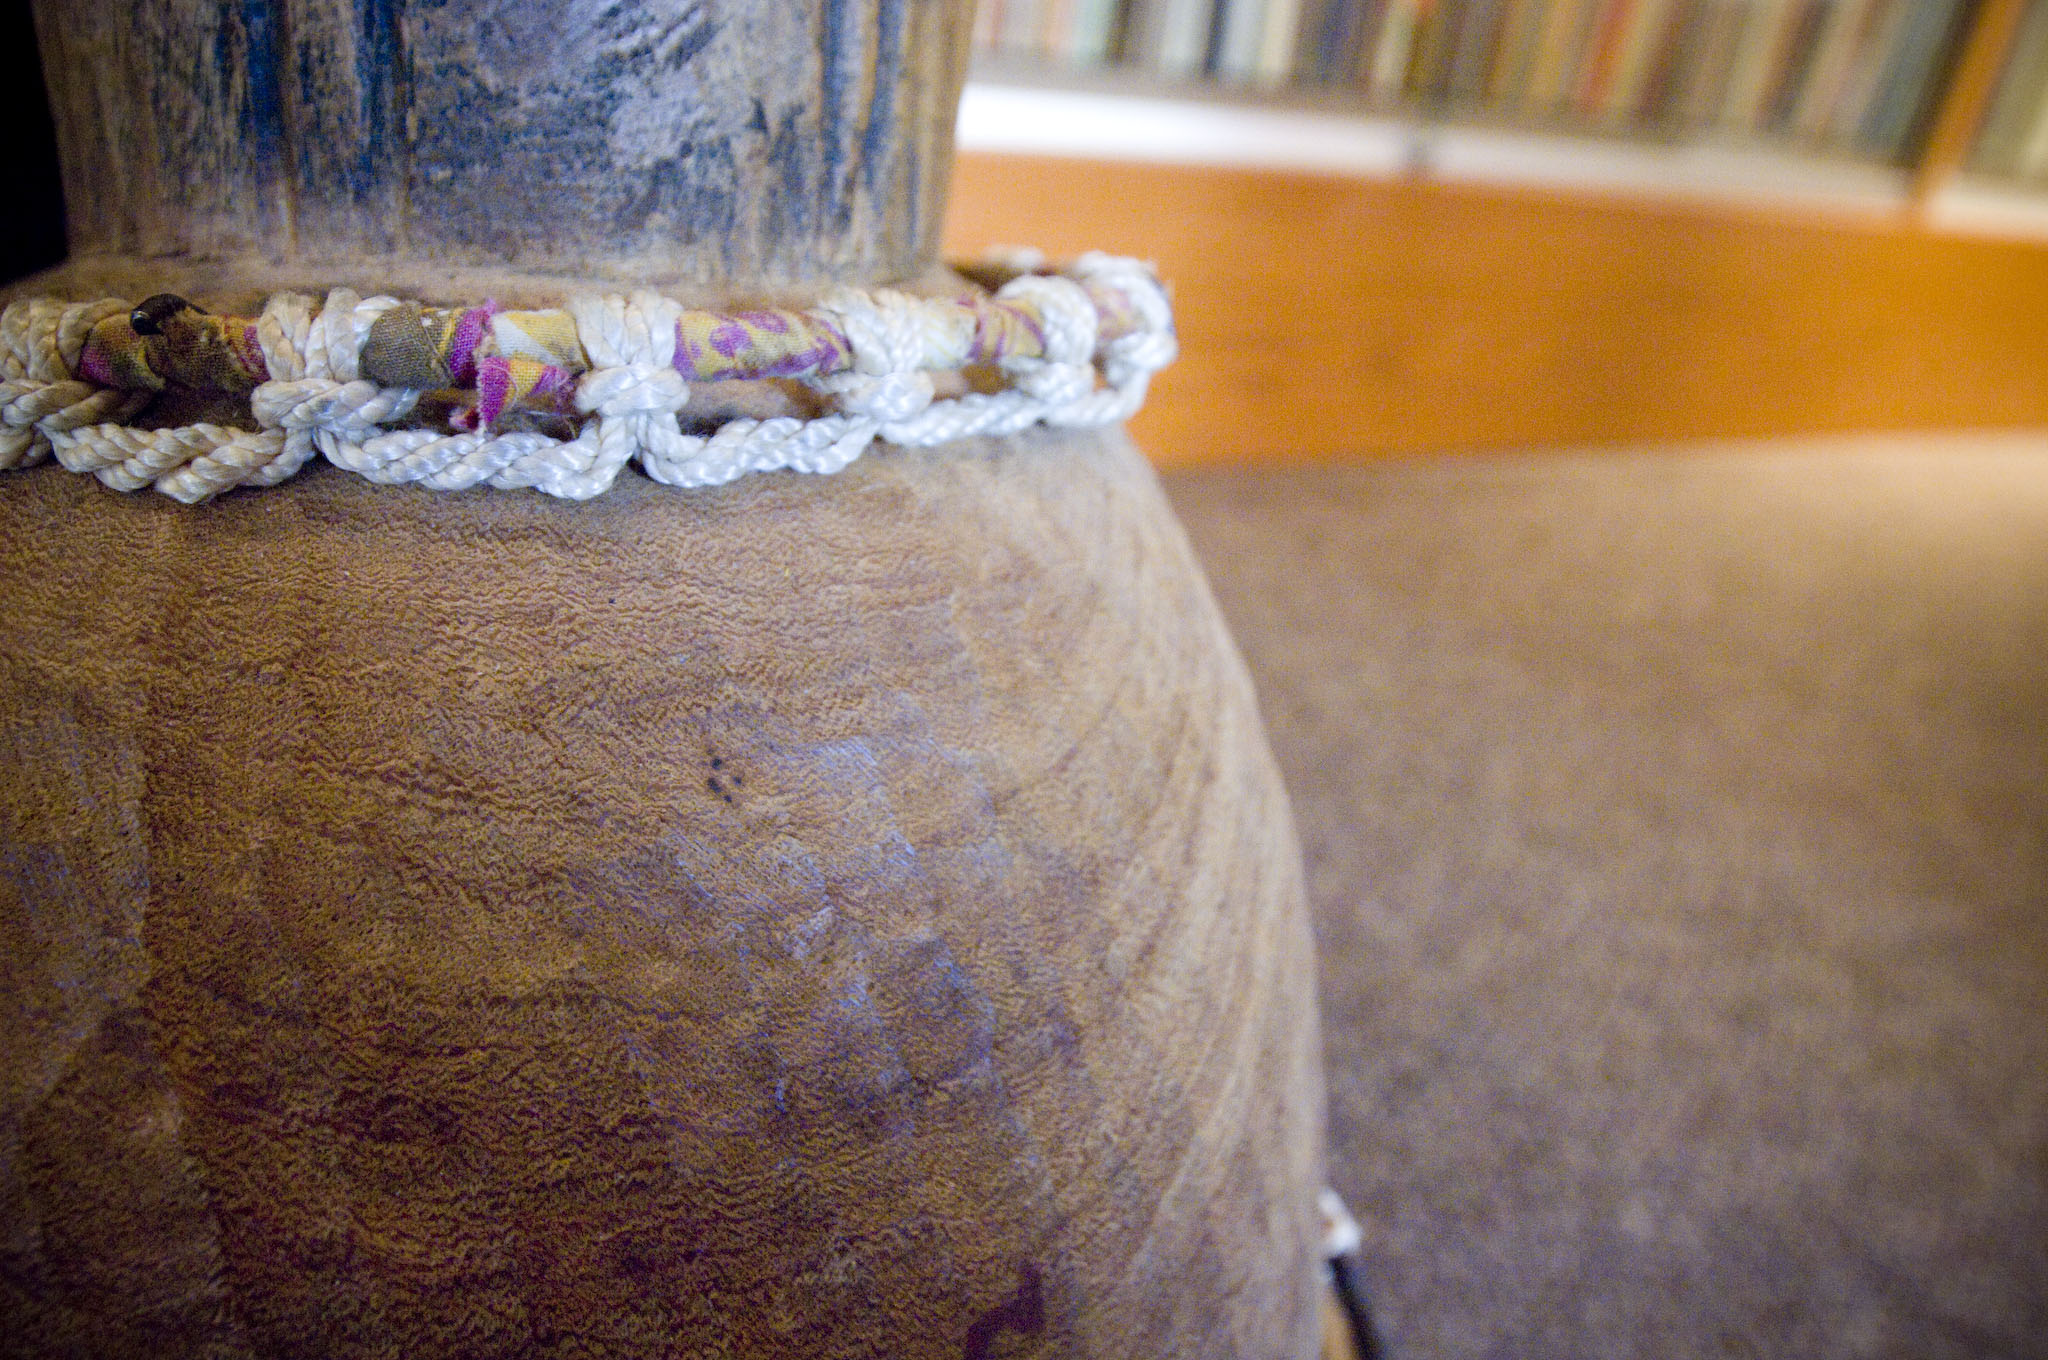 The base of a large drum with a white macramed collar fitted around the neck as it transitions to a wide base